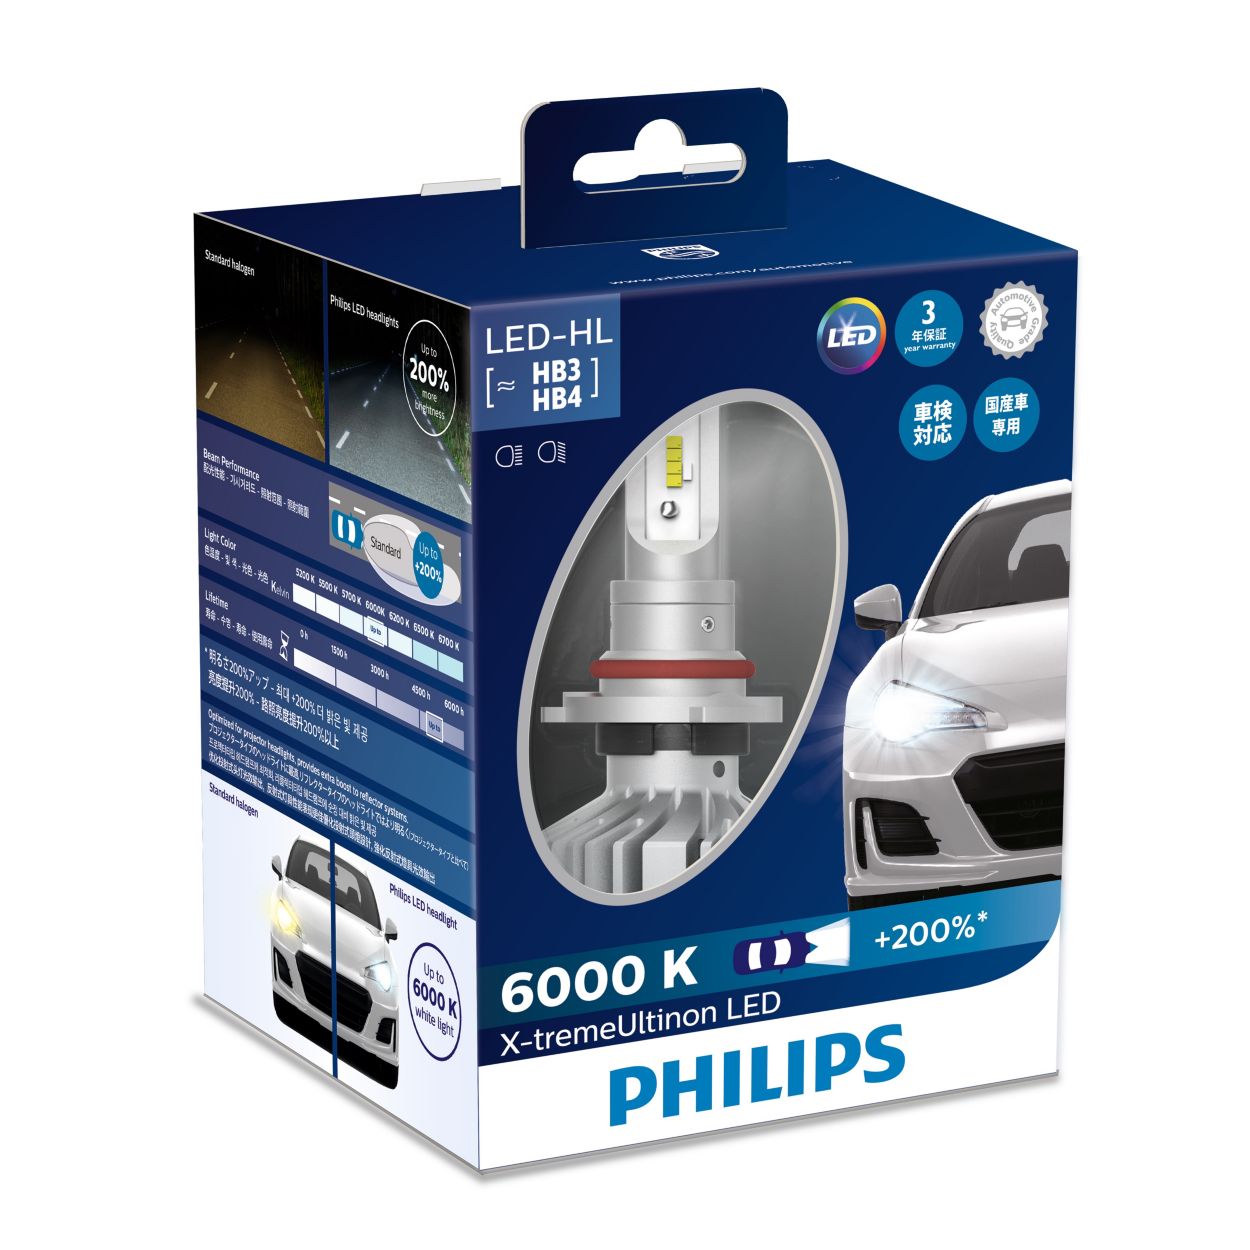 https://images.philips.com/is/image/philipsconsumer/738398270caf425ca7e2afaa006a1618?$jpglarge$&wid=1250